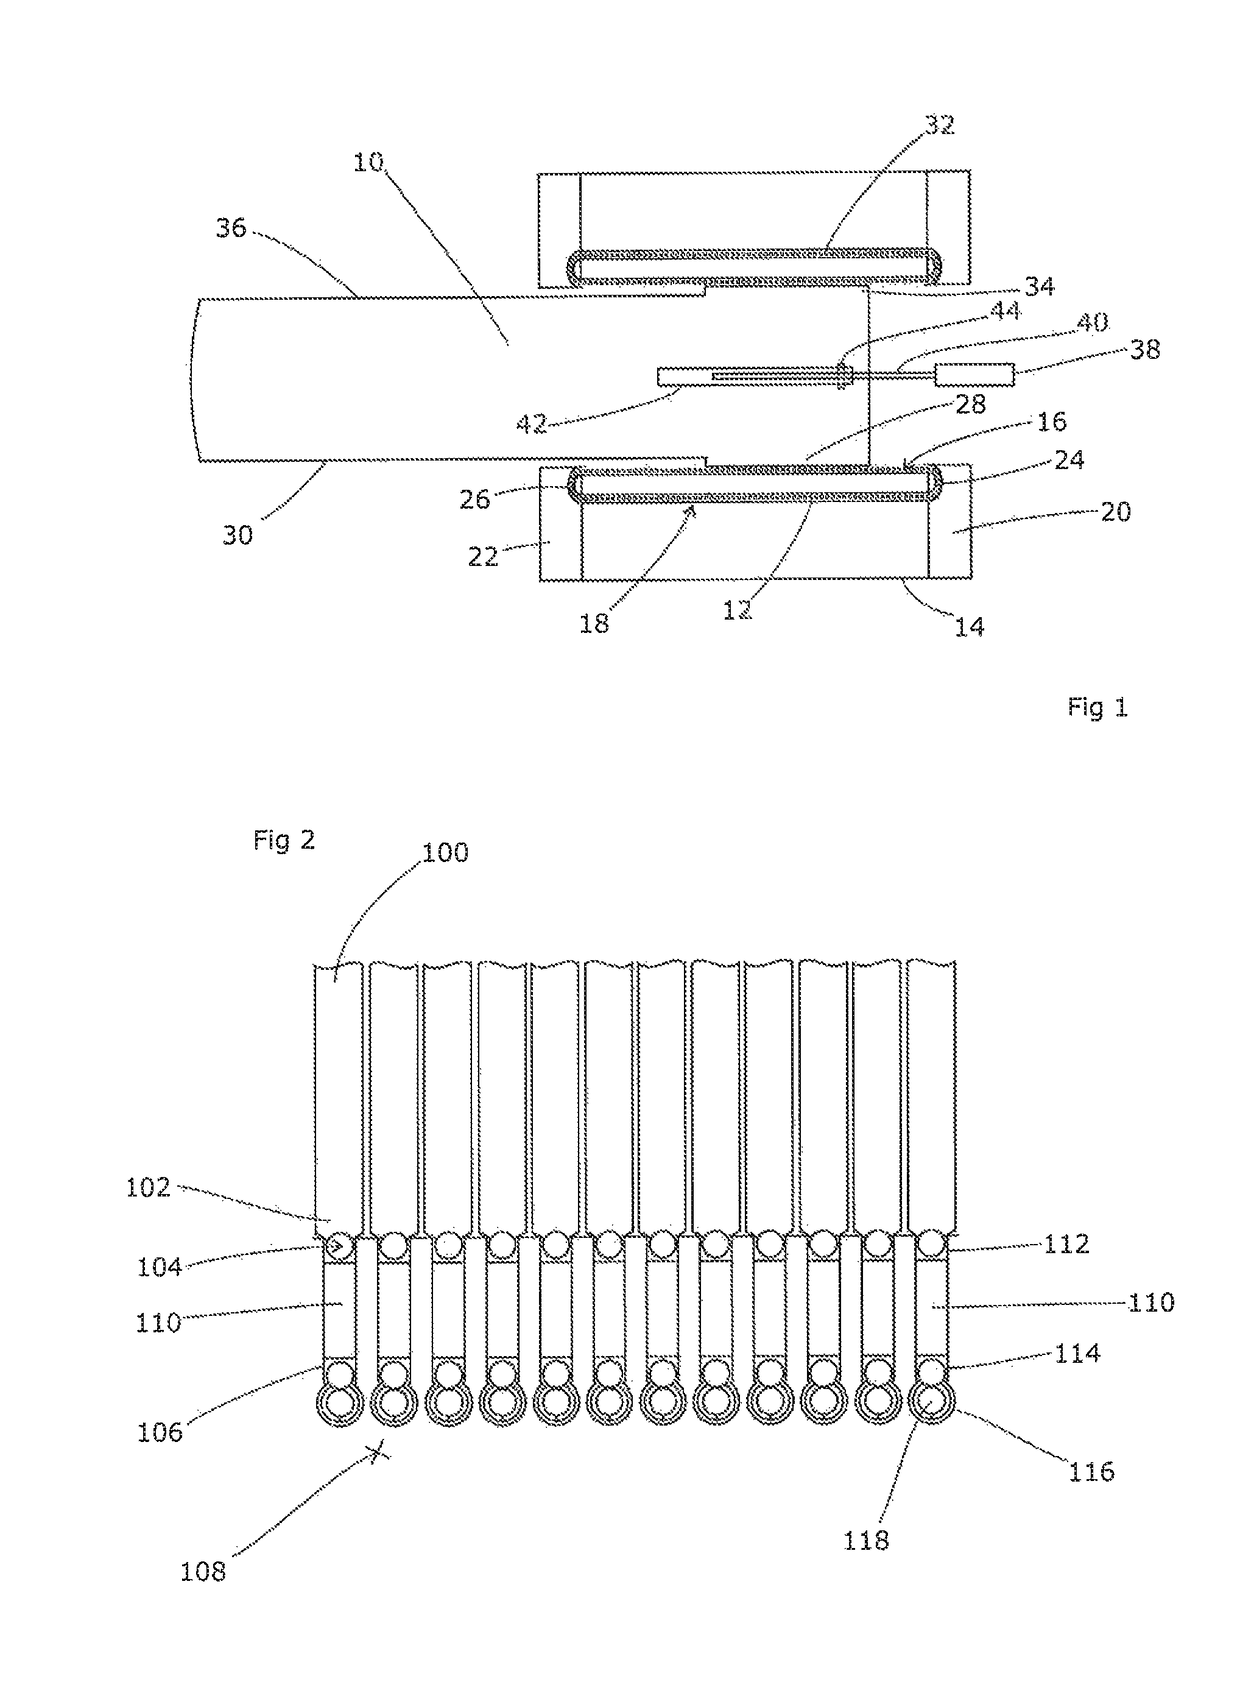 Multi-leaf collimator with leaf sliding means using rolling elements